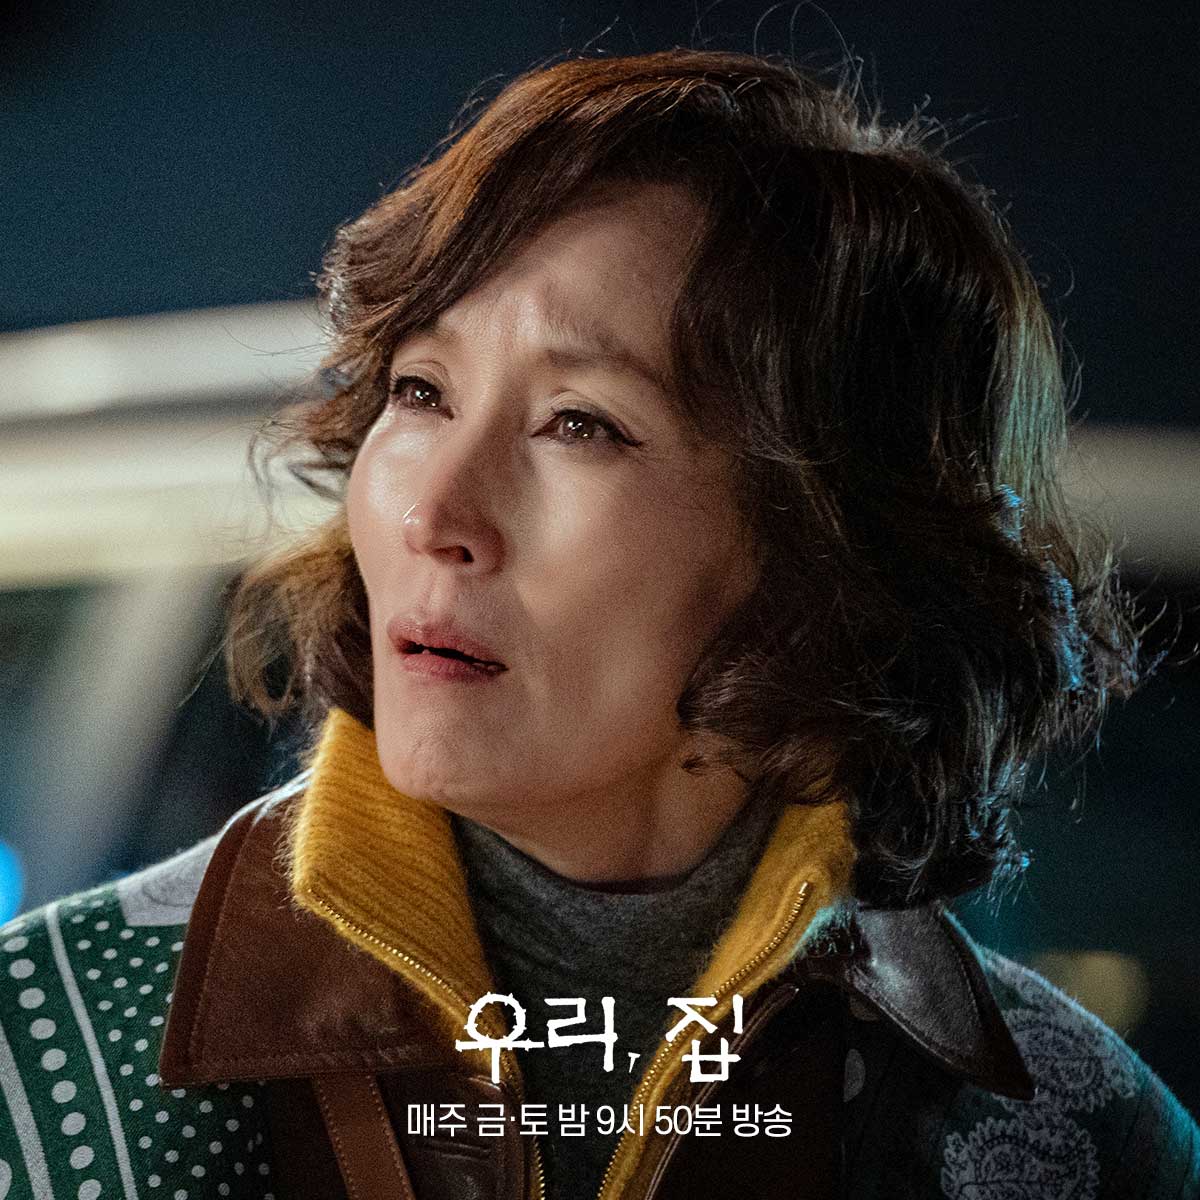 Kim Hee Sun Thinks Her Husband Is Dead, But Her Mother-In-Law Insists Otherwise In 